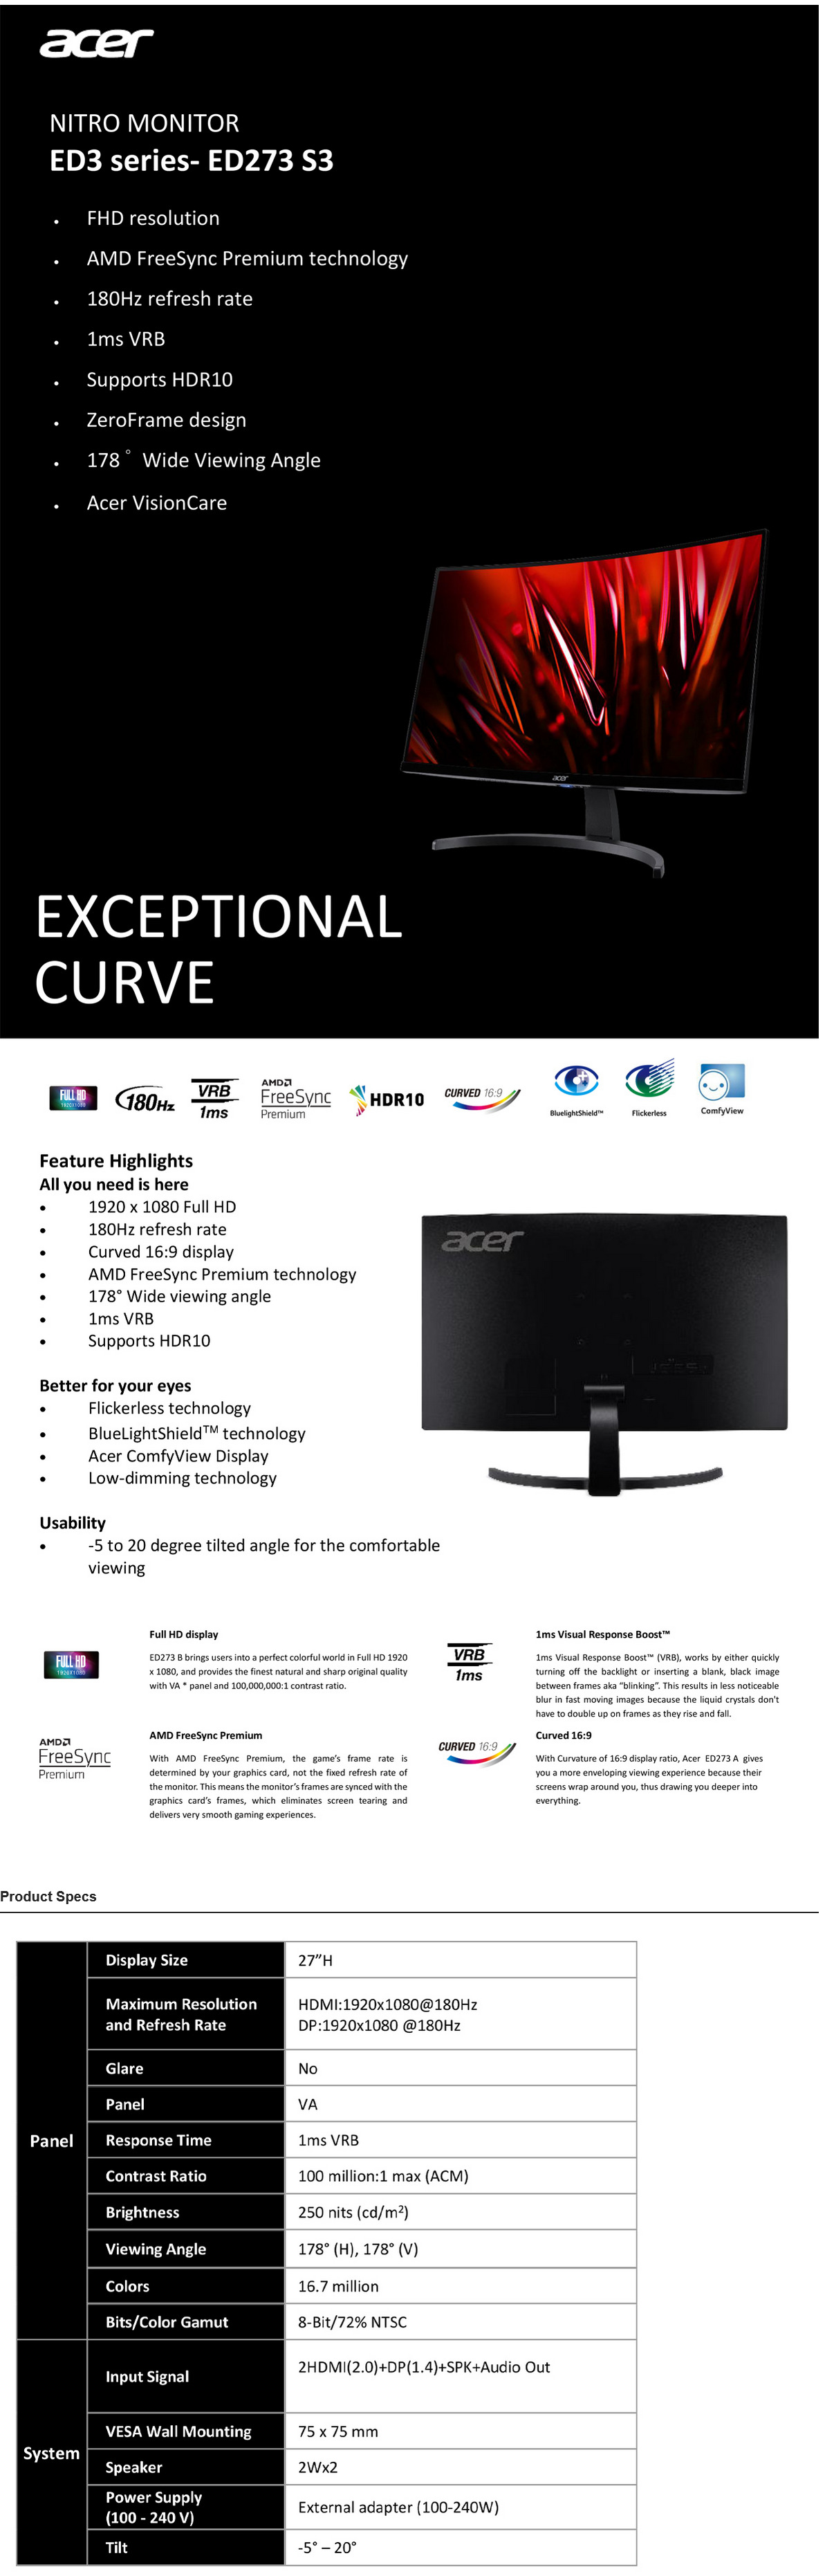 A large marketing image providing additional information about the product Acer Nitro ED273S3 27" Curved FHD 180Hz VA Monitor - Additional alt info not provided